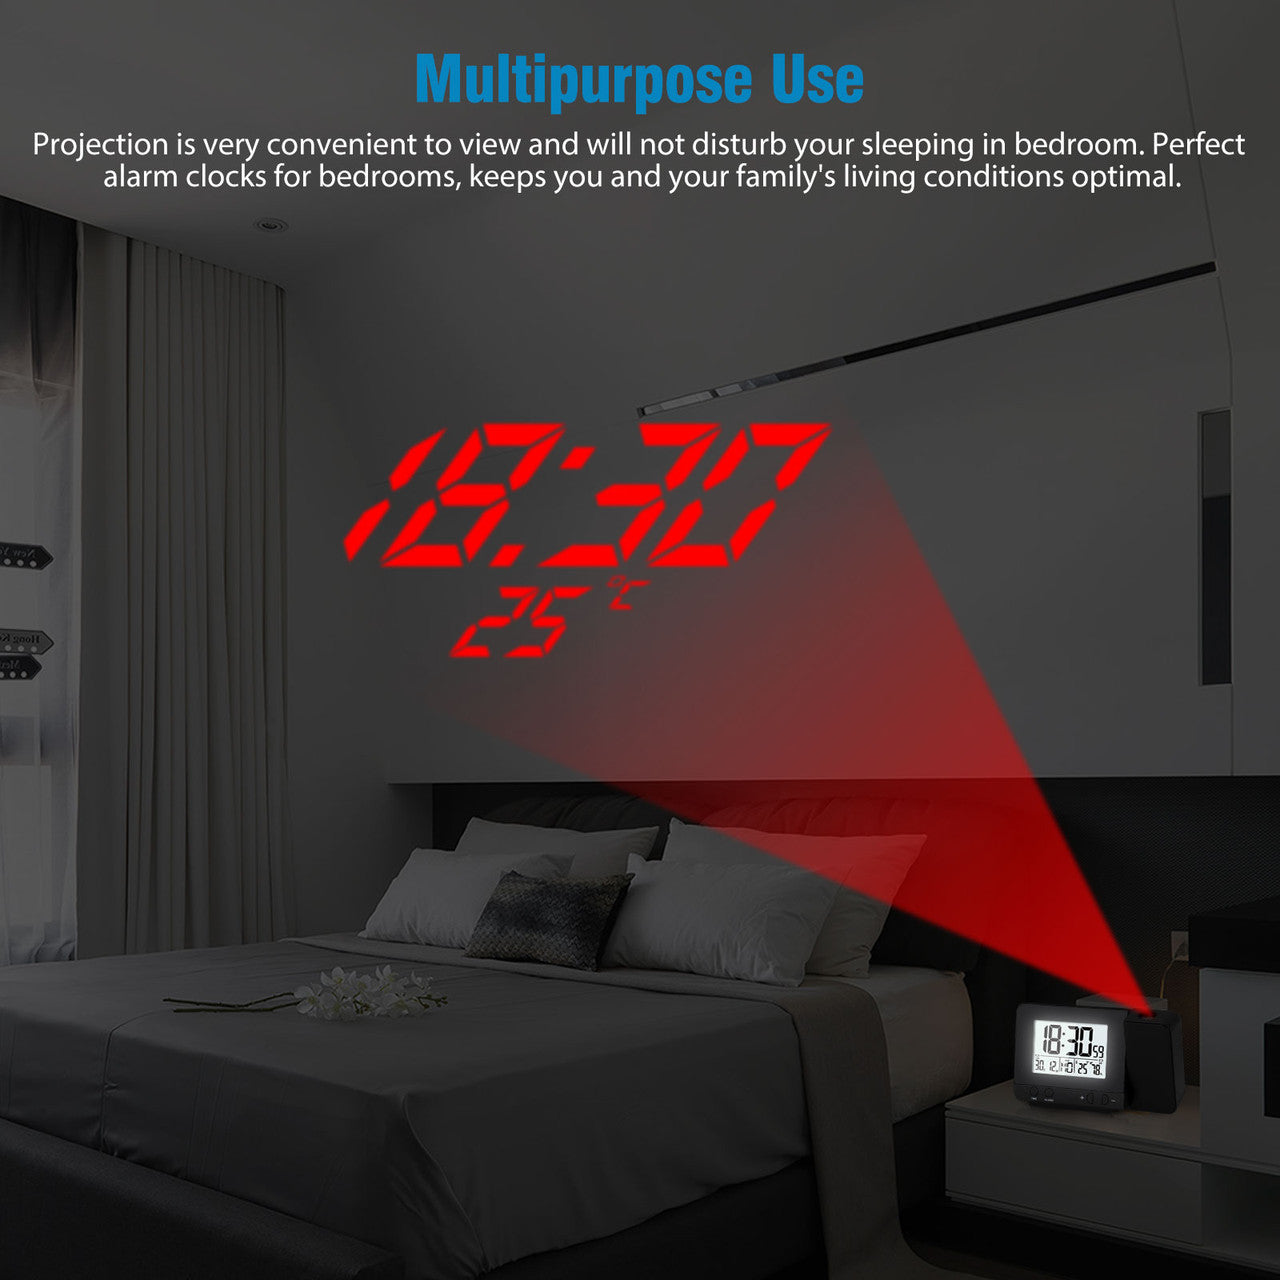 Digital Clock Projector with Indoor Thermometer, LED Display, USB Charging, Snooze Function, Black